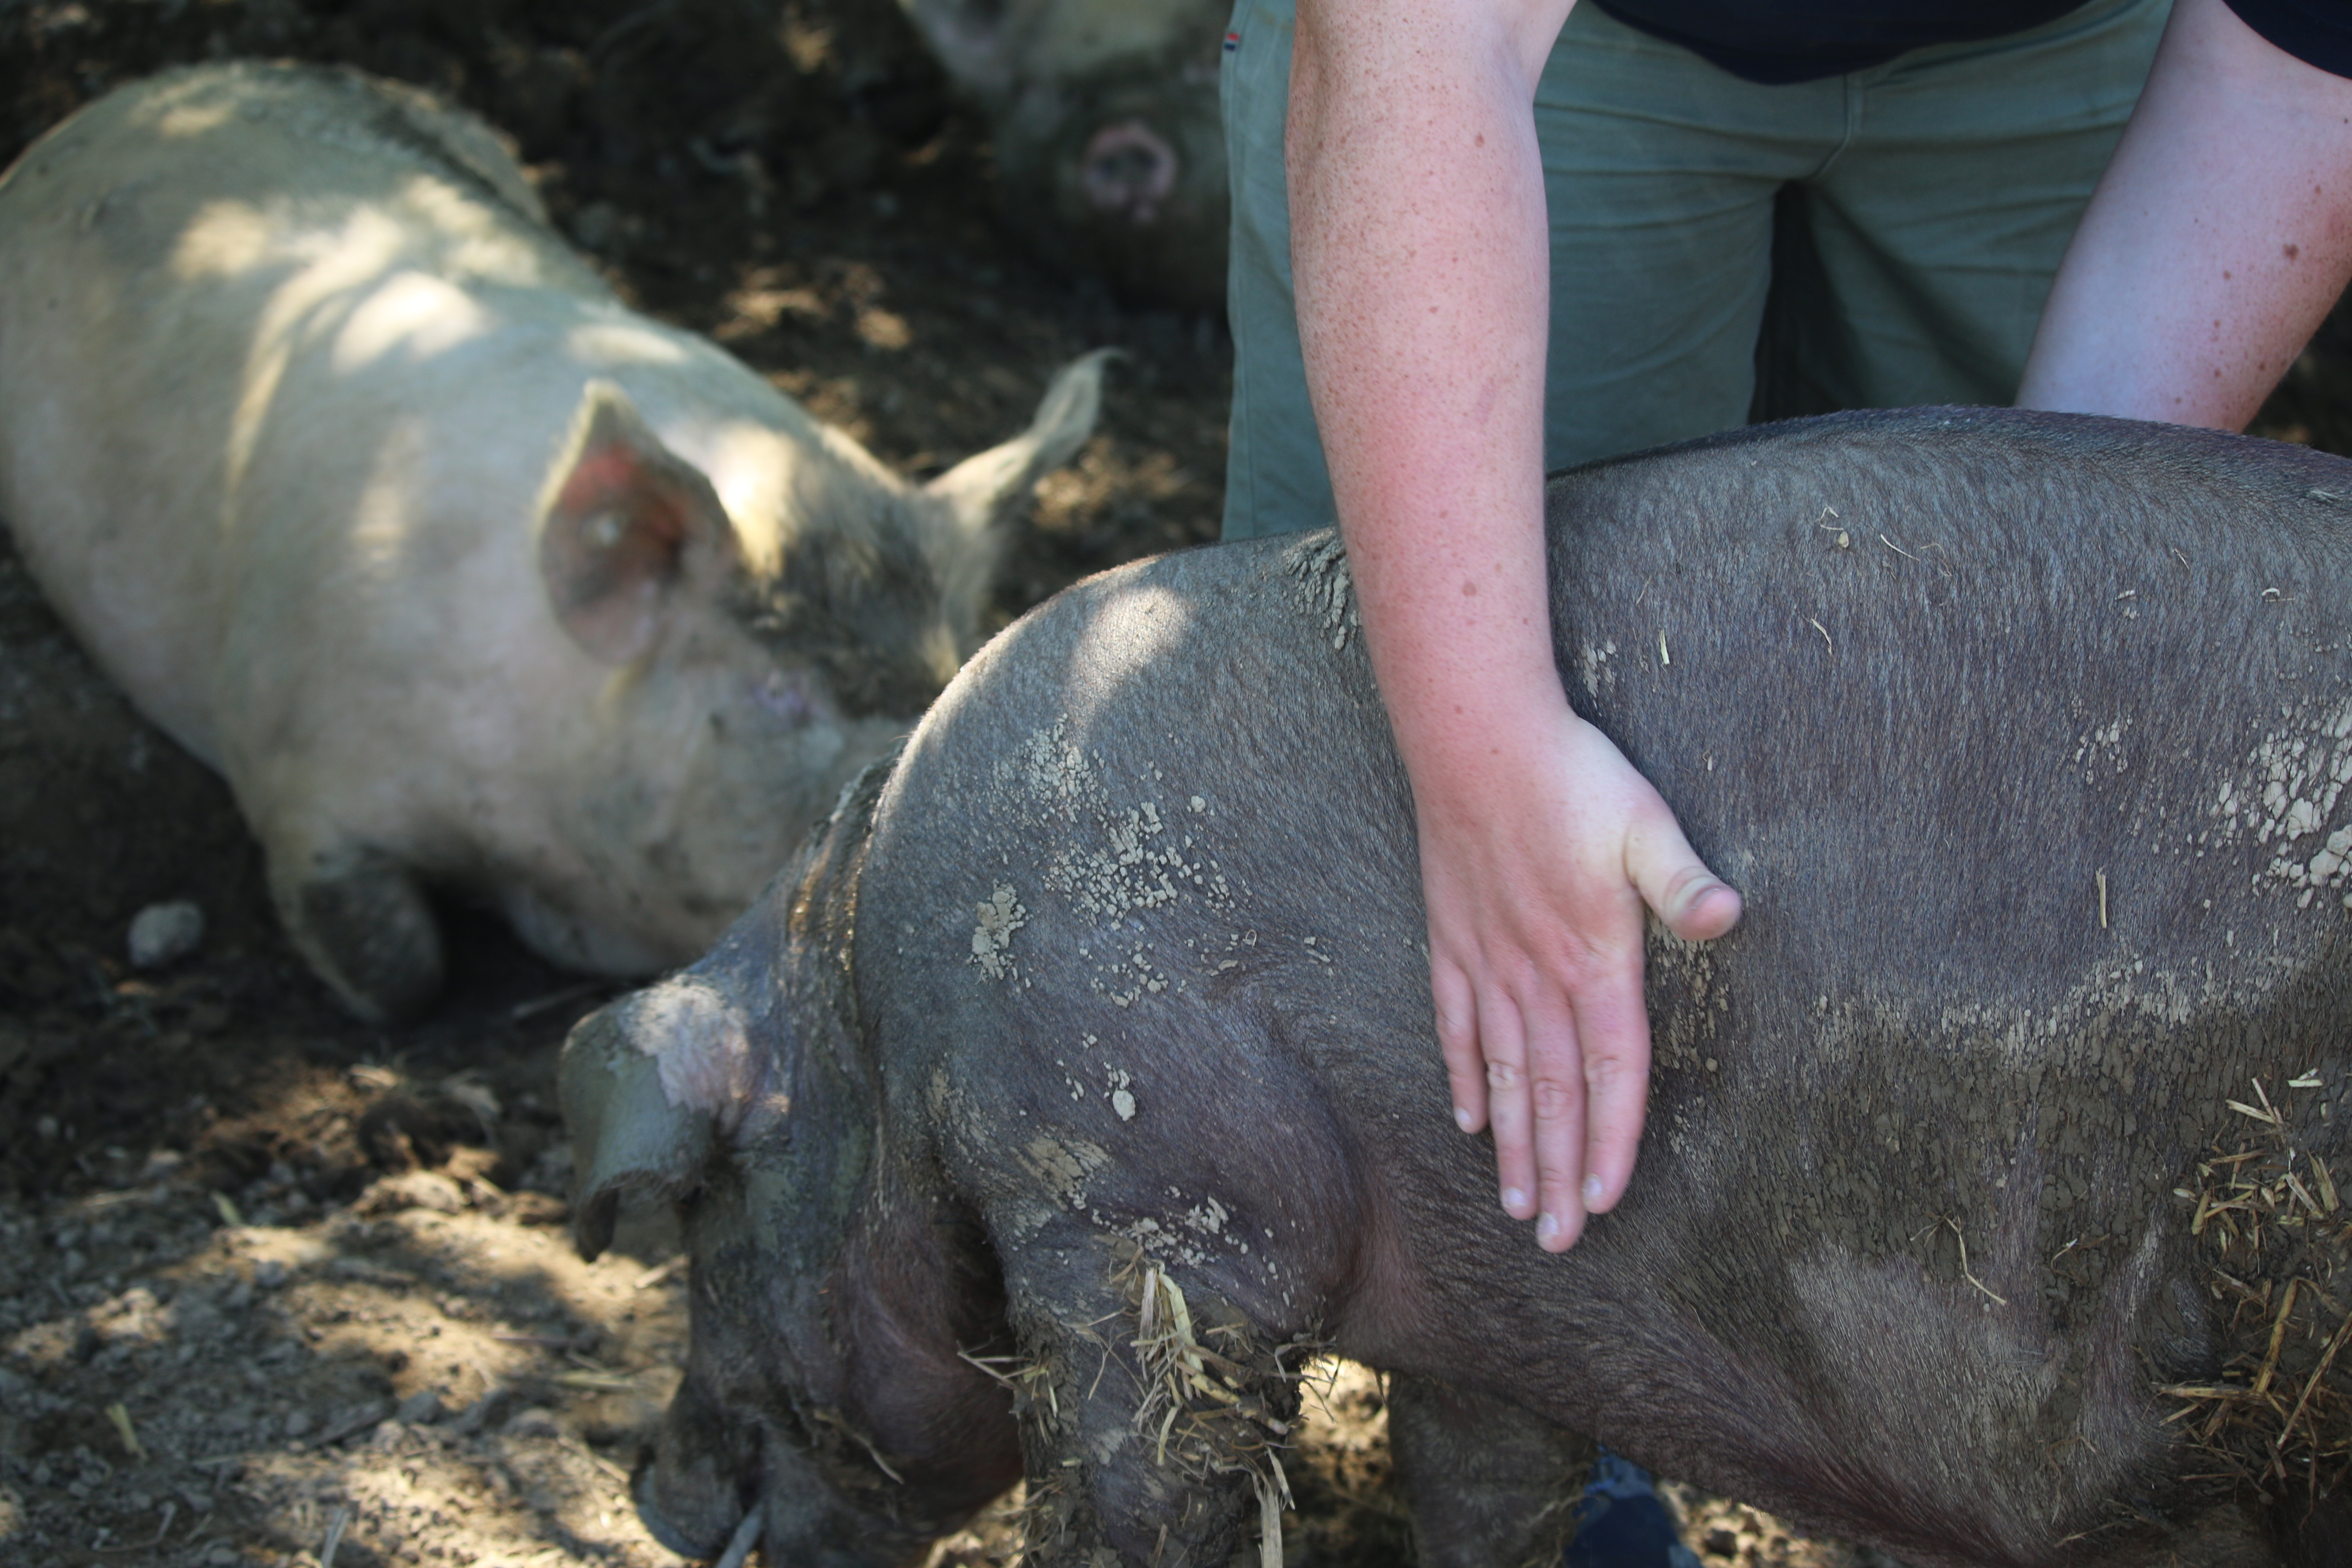 If the disease status of your pigs is unknown, it makes sense to keep hand to mouth contact to a minimum when handling your pigs, especially incoming pigs. Incorporating hand washing with soap into your routine, before and after visiting your pigs is a first step